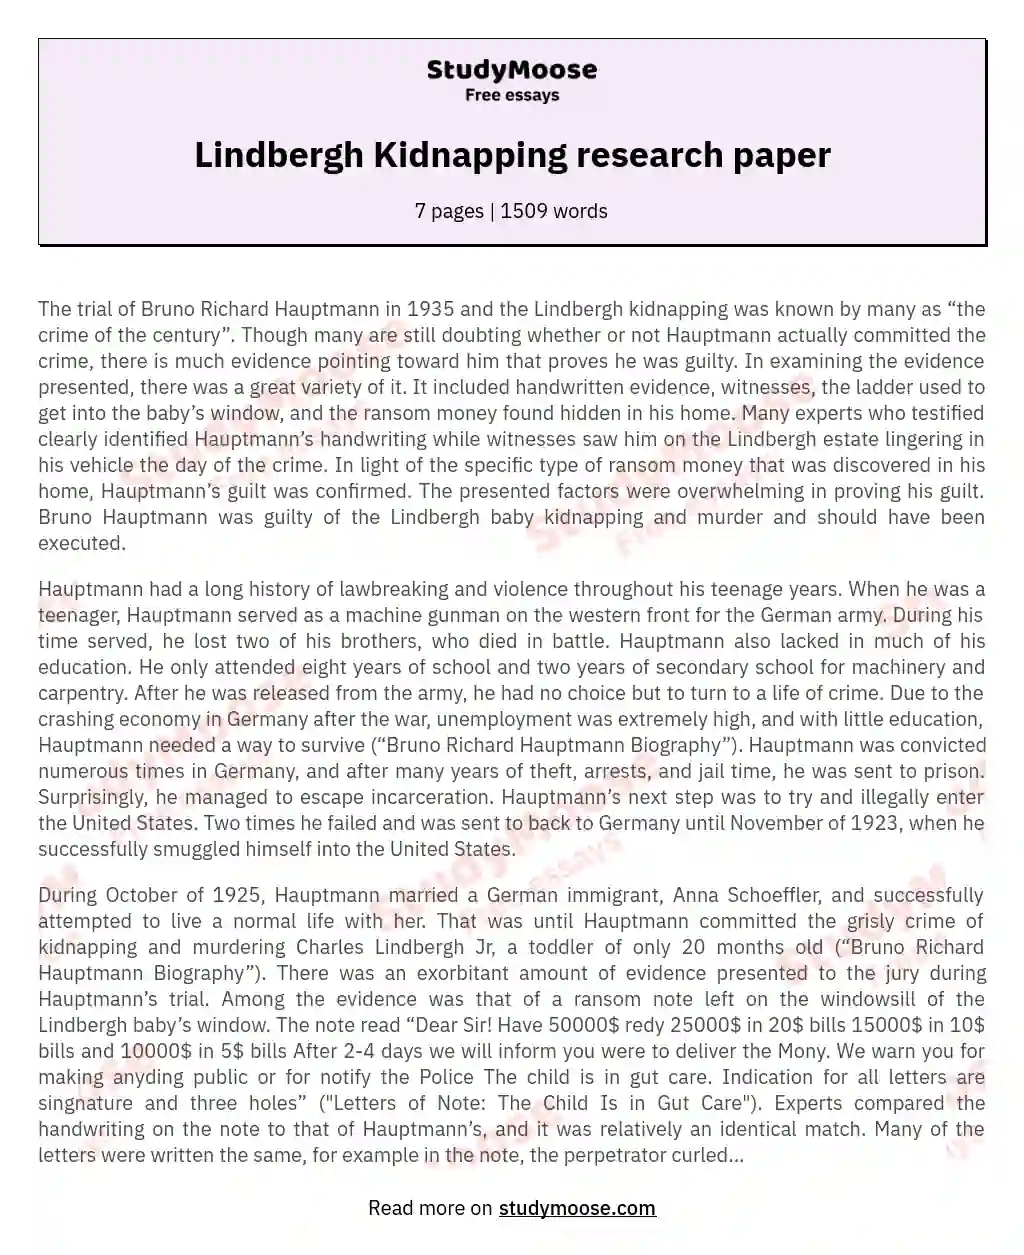 Lindbergh Kidnapping research paper essay